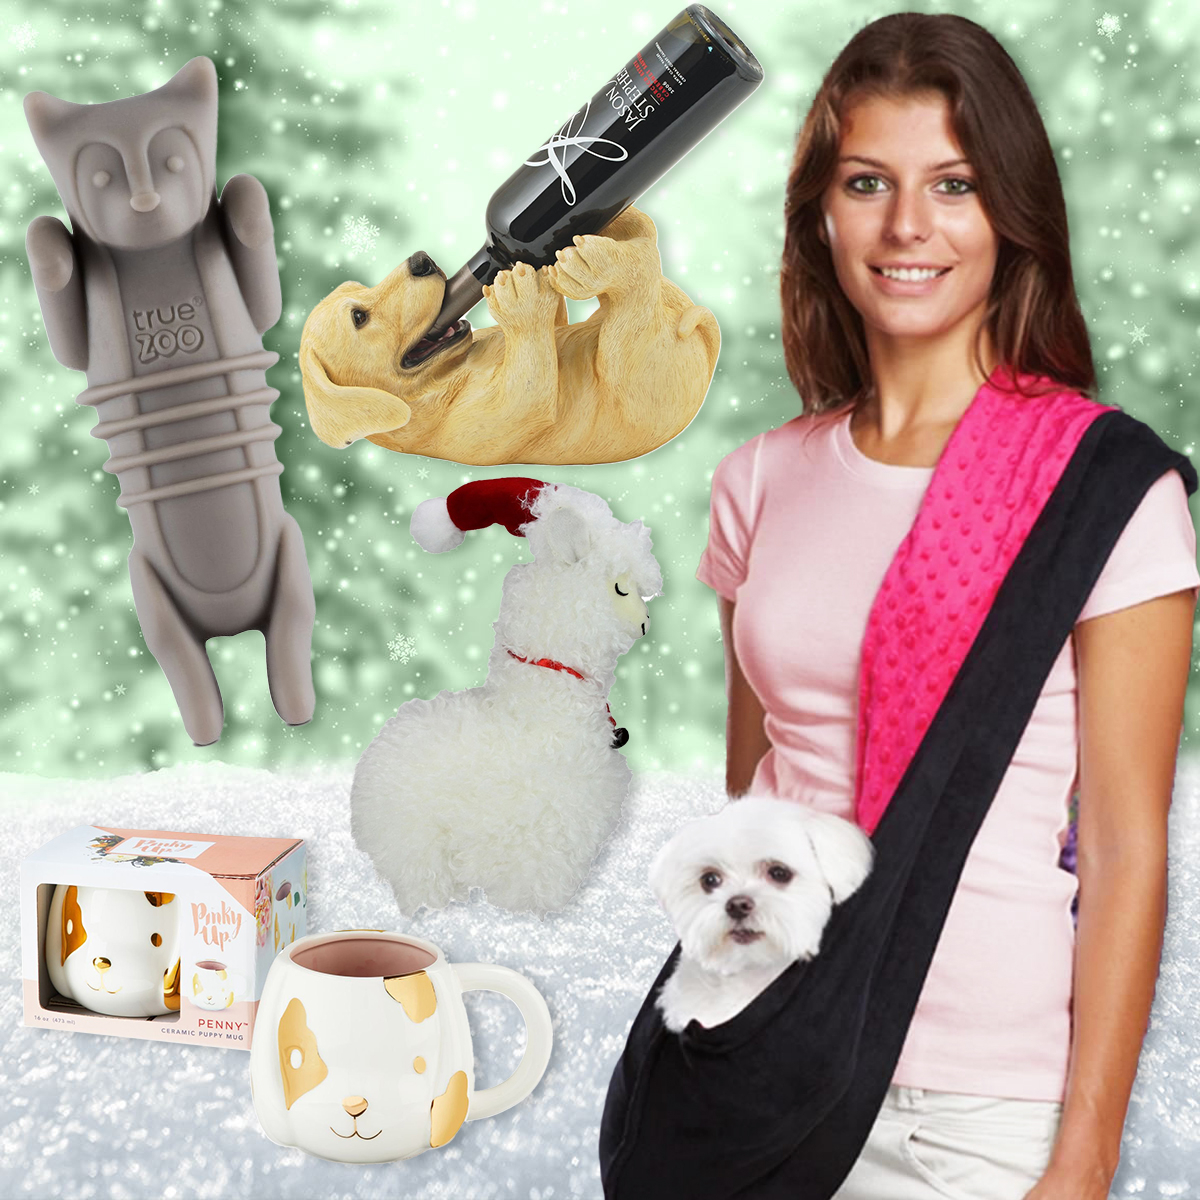 The Best Gifts For Cat and Dog Moms – Homescape Pets